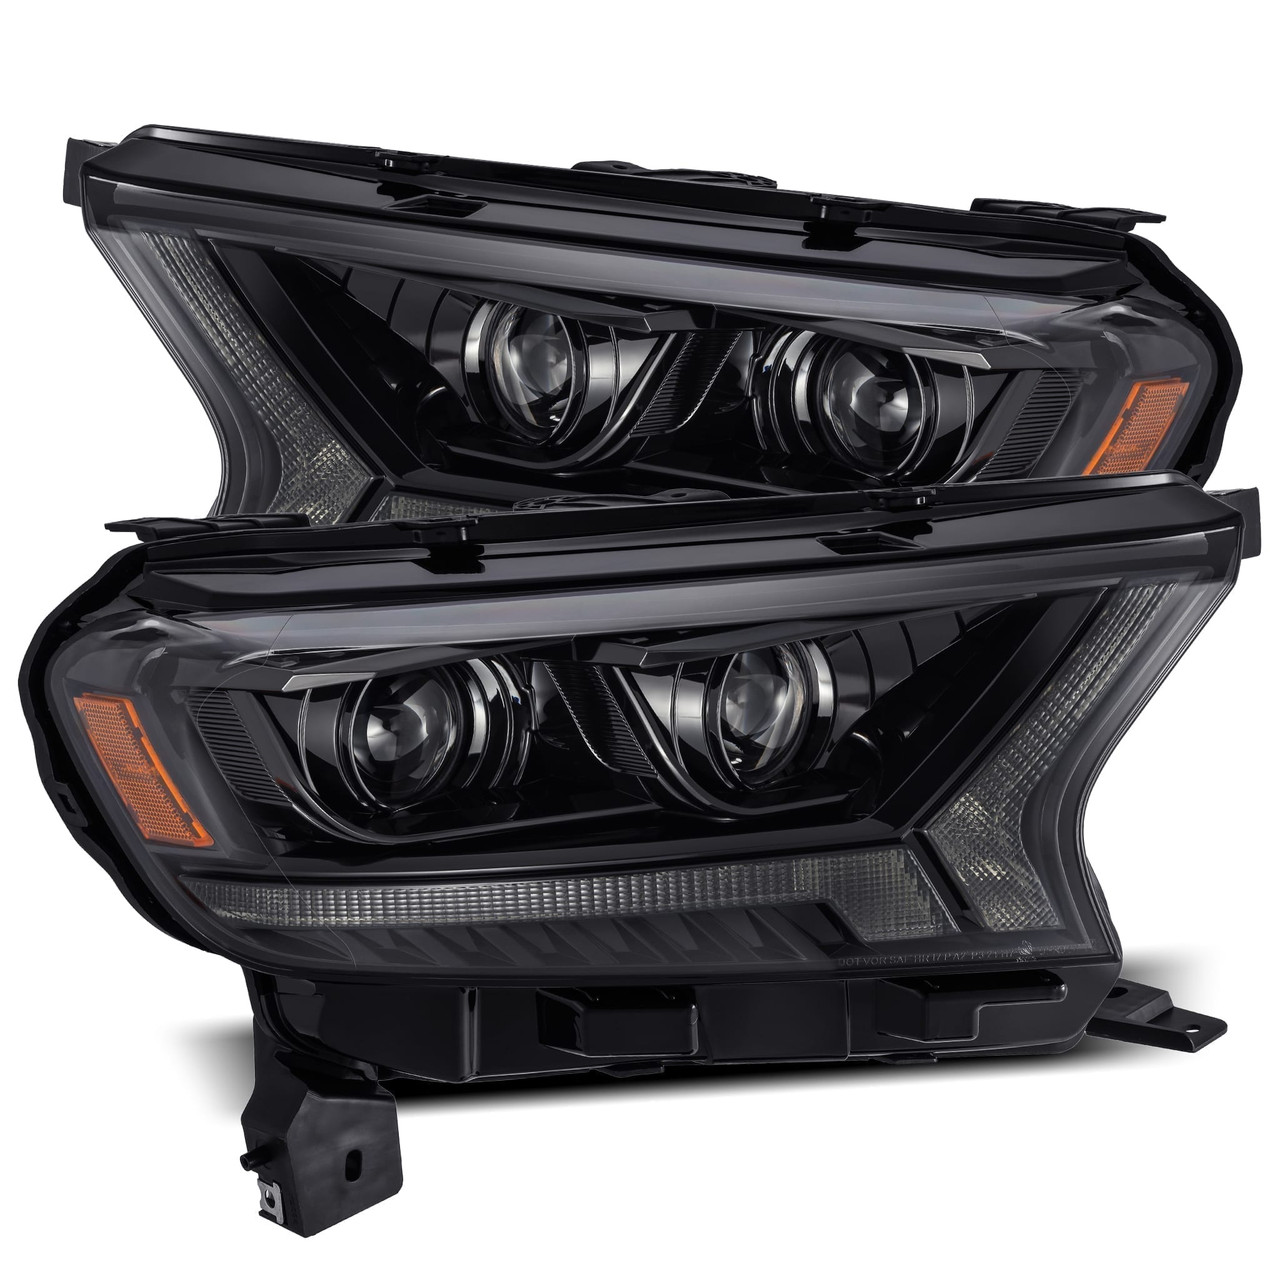 Alpharex LUXX-Series LED Projector Headlights Alpha-Black for 2019 to 2022 Ford Ranger (880121)Main View